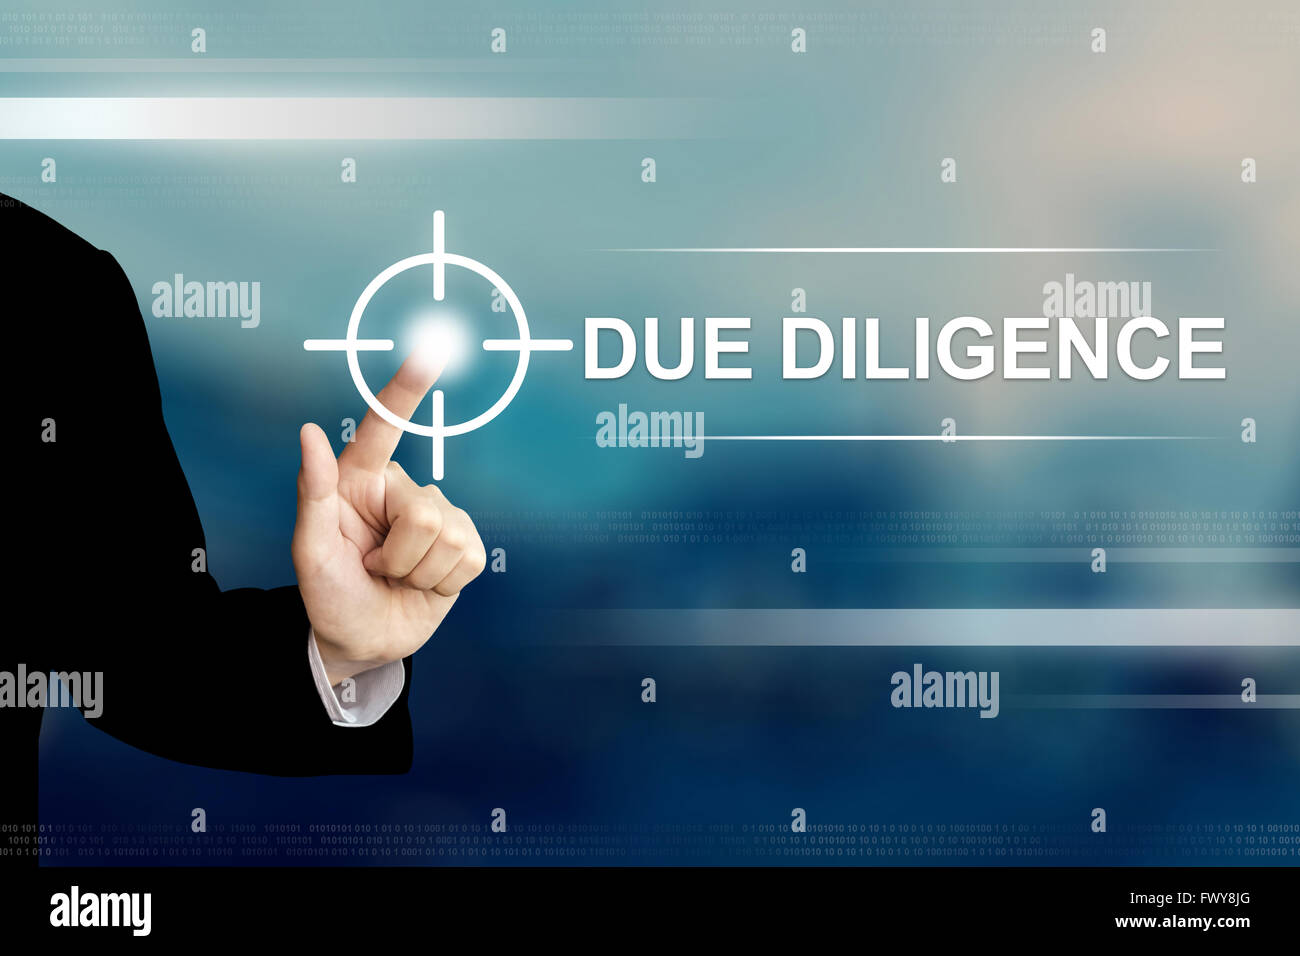 business hand pushing due diligence button on a touch screen interface Stock Photo